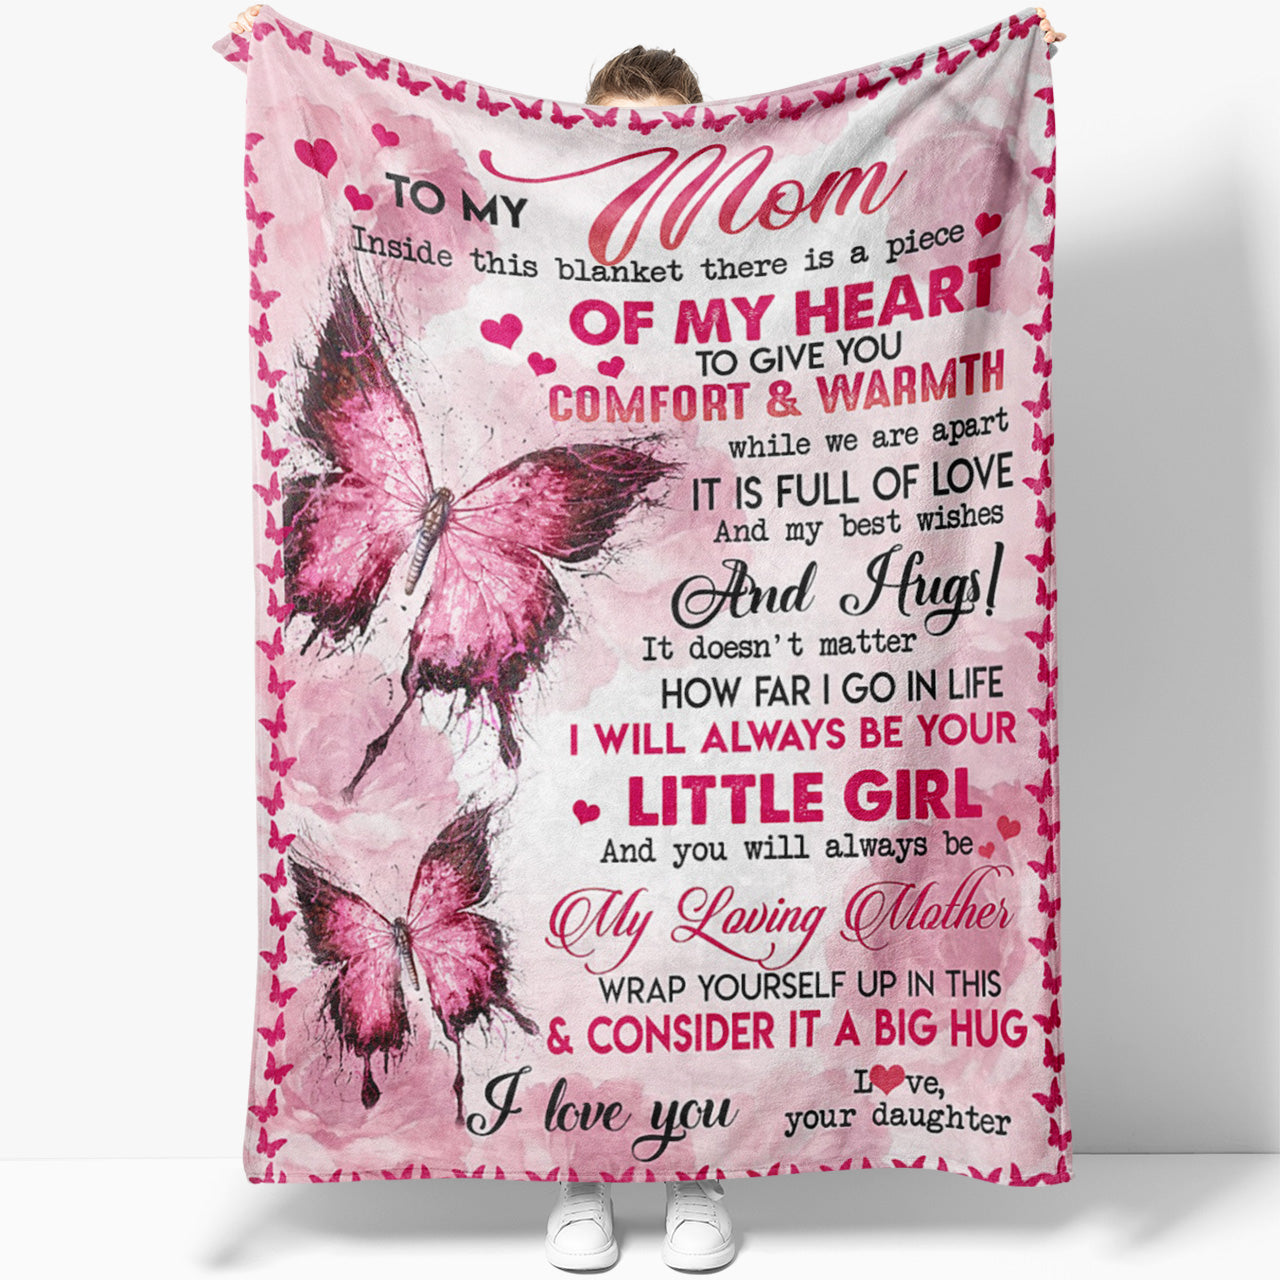 Blanket Gift Ideas For Mom, A Piece of My Heart